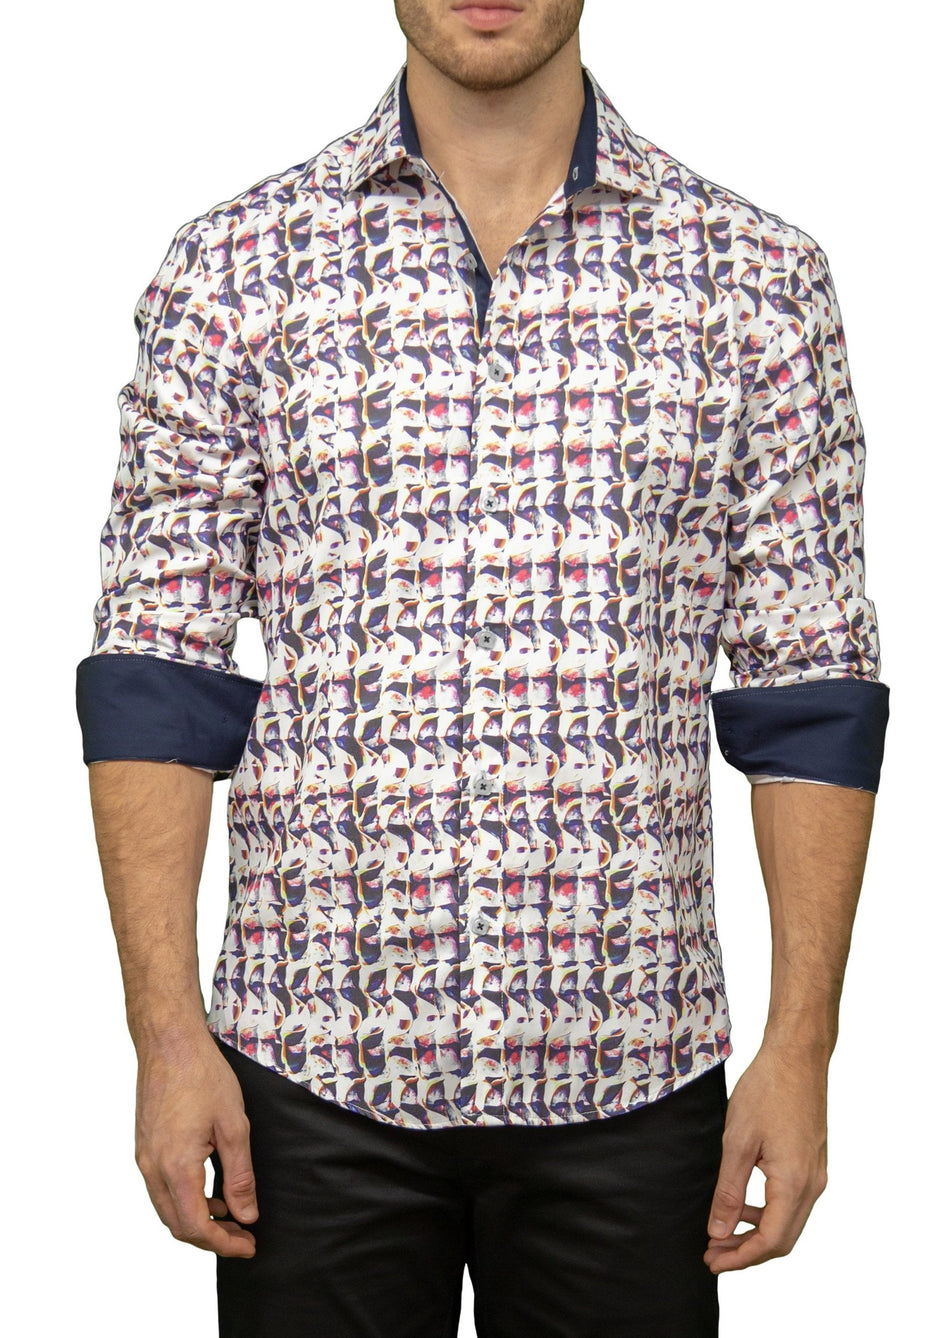 Men's White Printed Long Sleeve Button Up